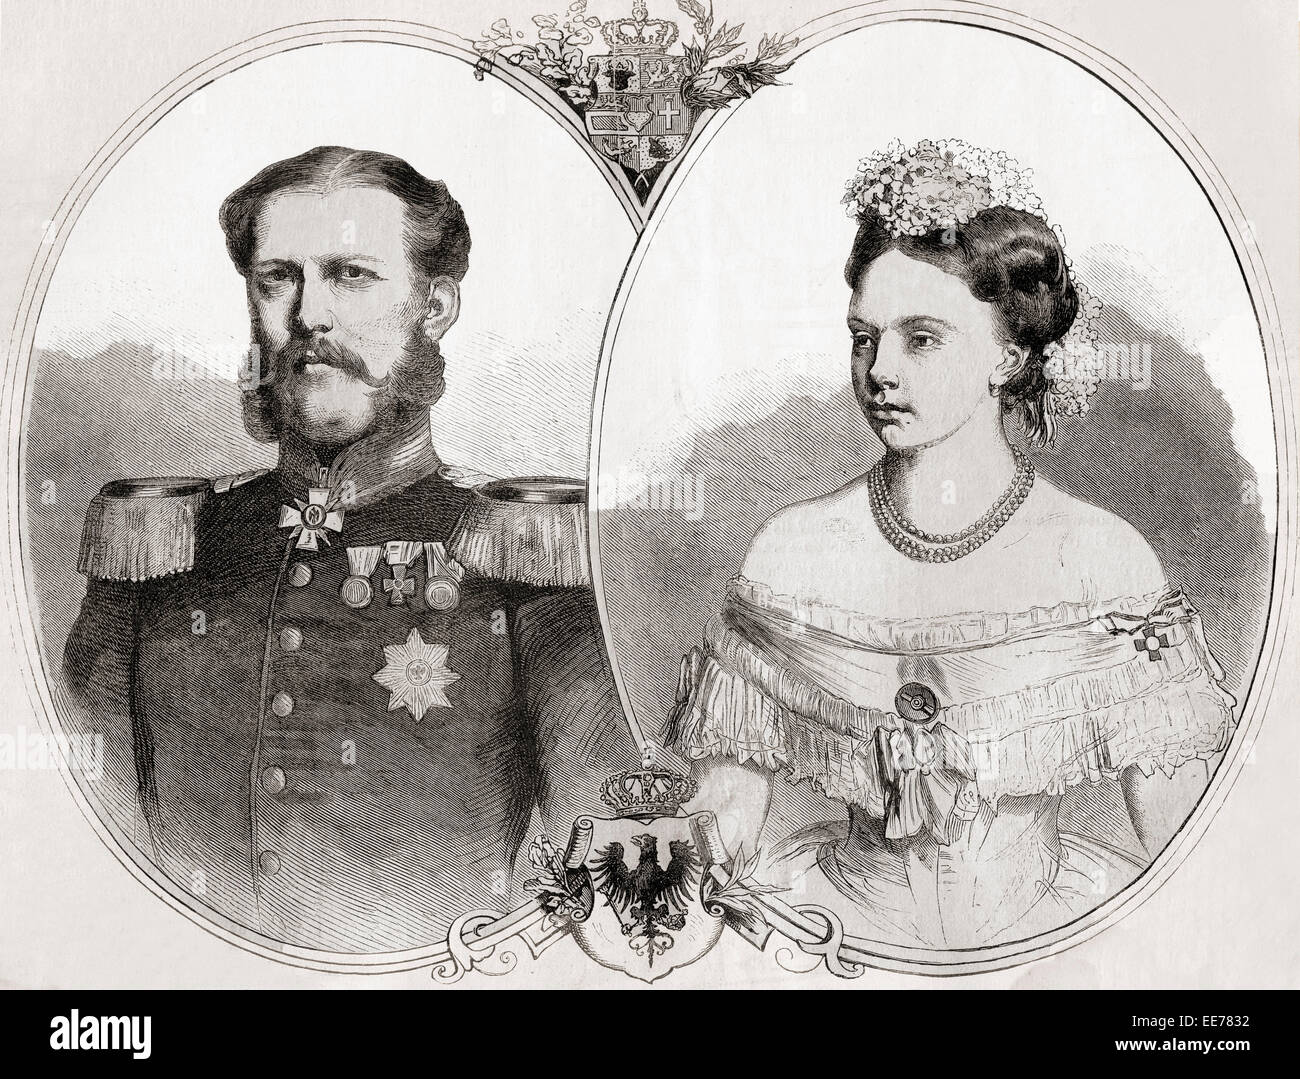 Duke William or Willem of Mecklenburg-Schwerin, 1827 - 1879,  and his wife Princess Frederica Wilhelmina Louise Elisabeth Alexandrine of Prussia,  1842 – 1906. Stock Photo